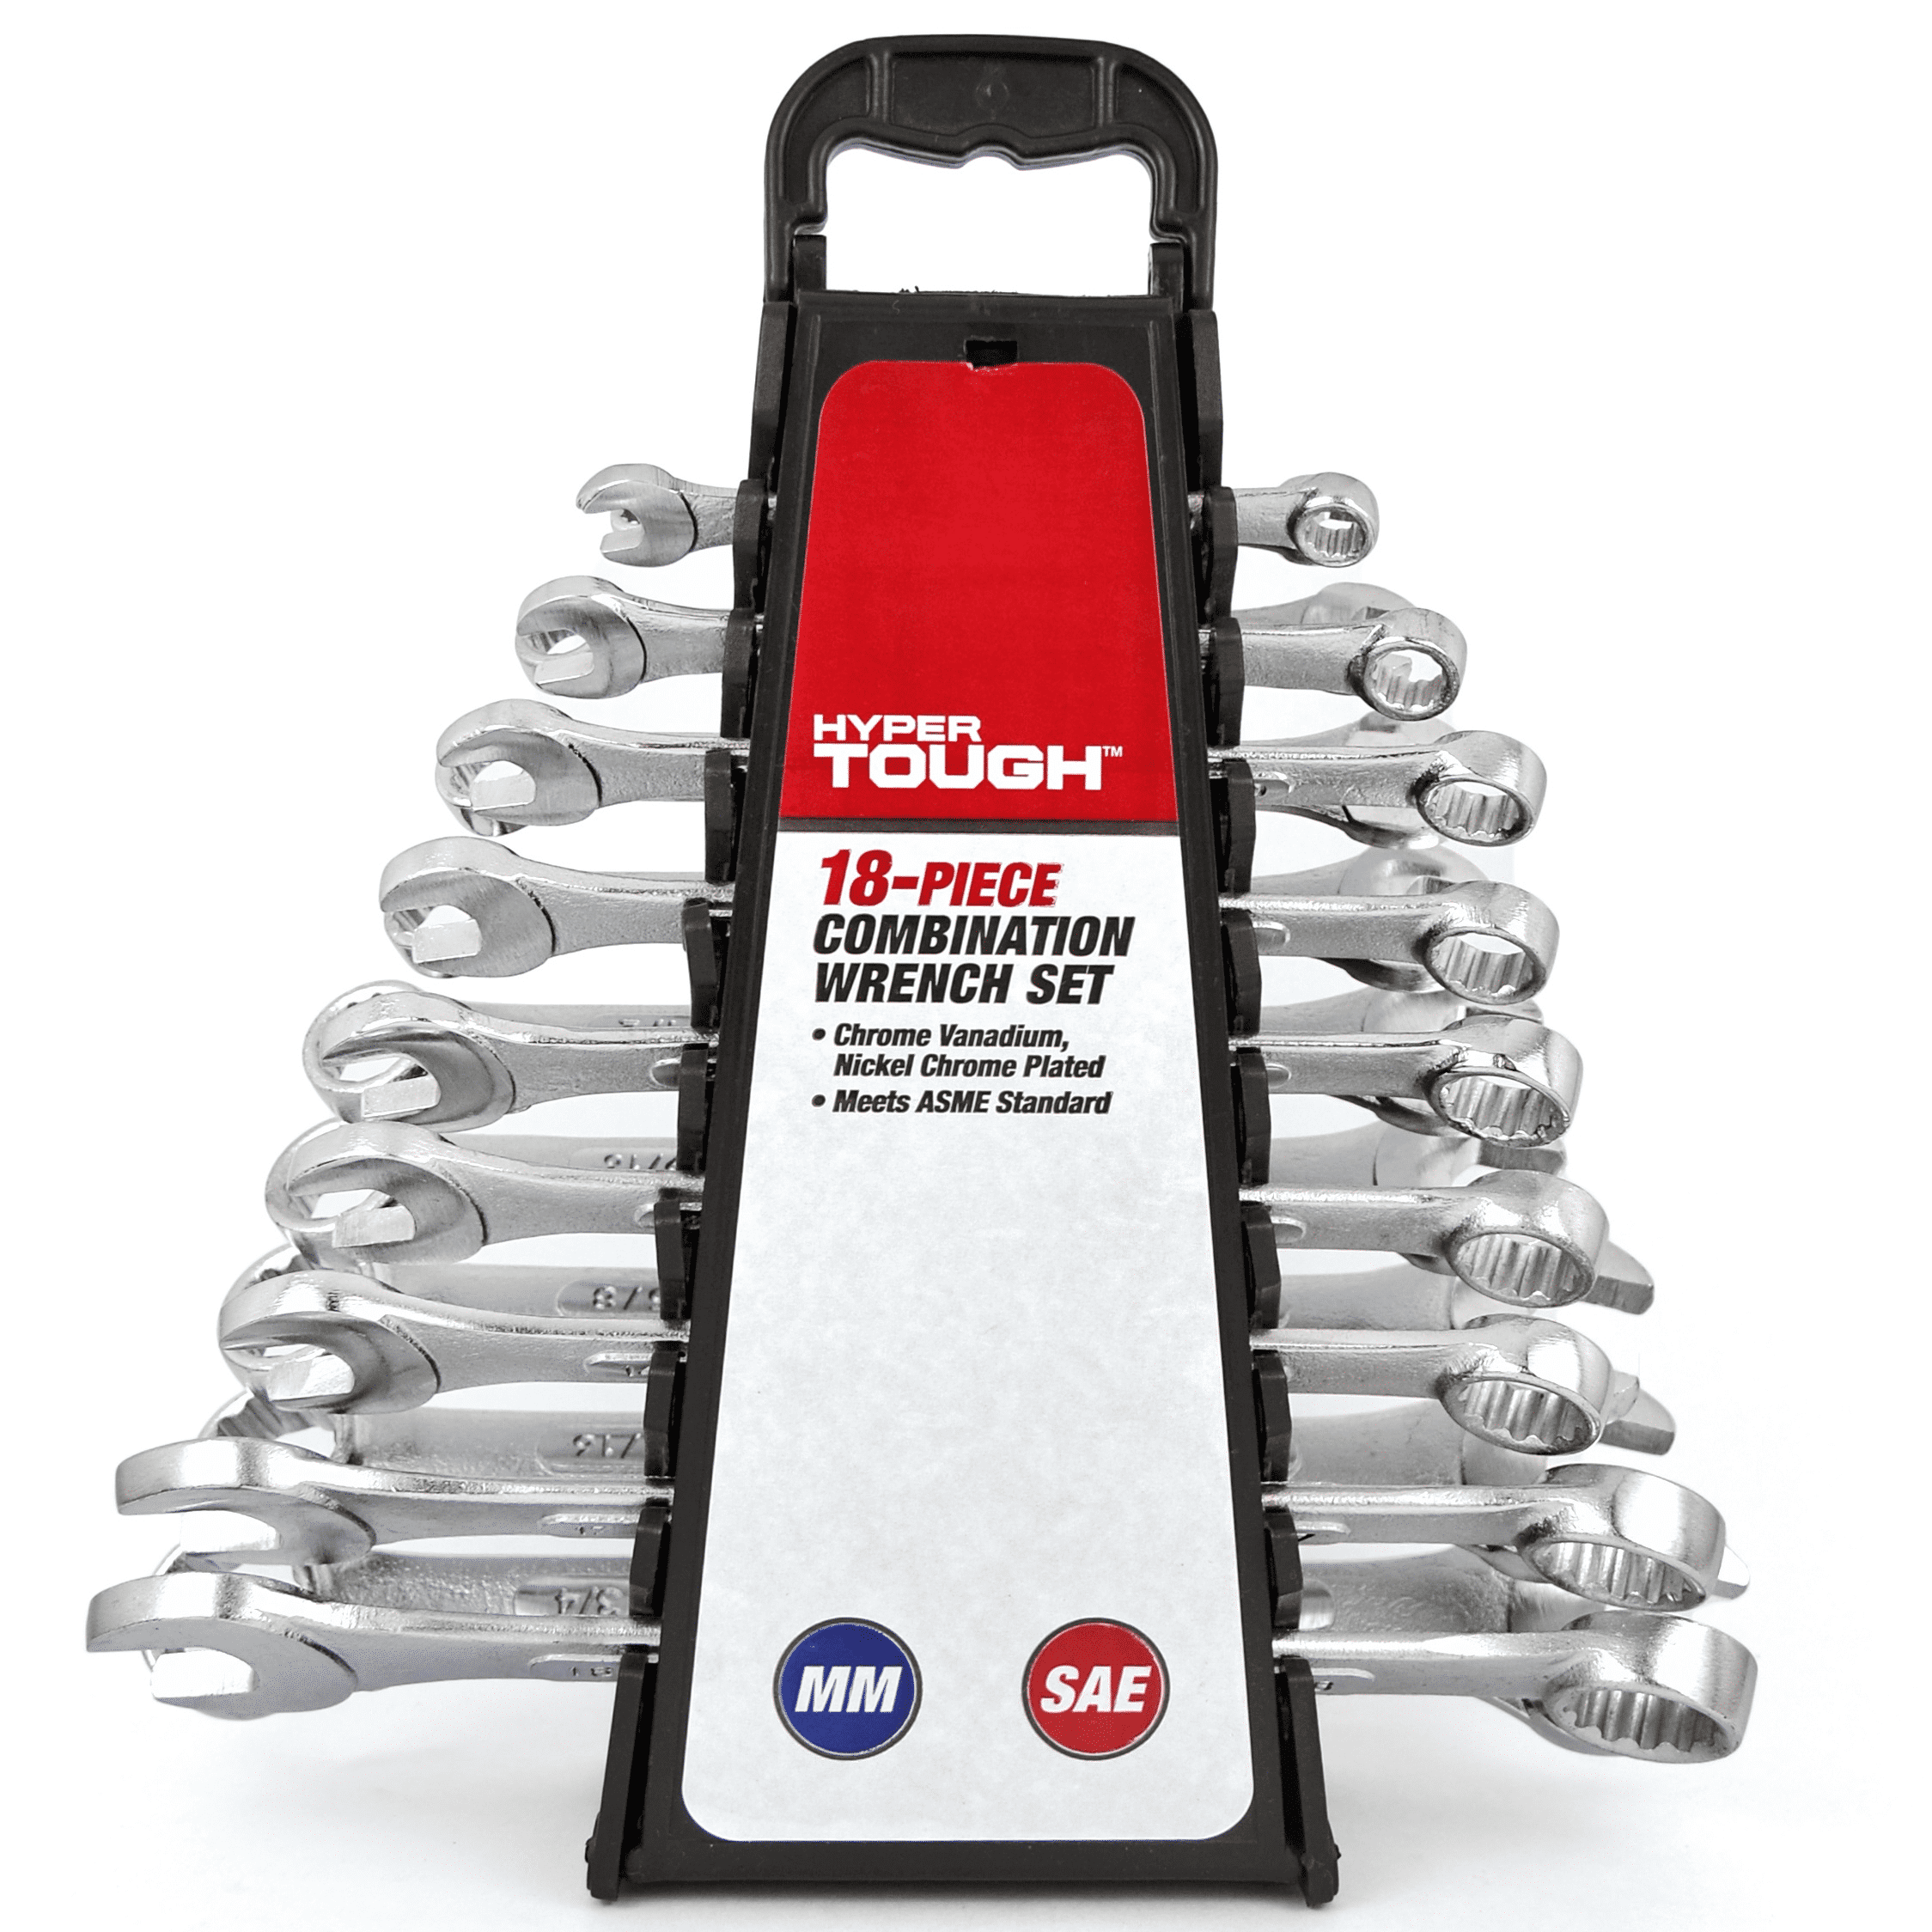 14 Piece Metric Combination Wrench Set by KlassTools